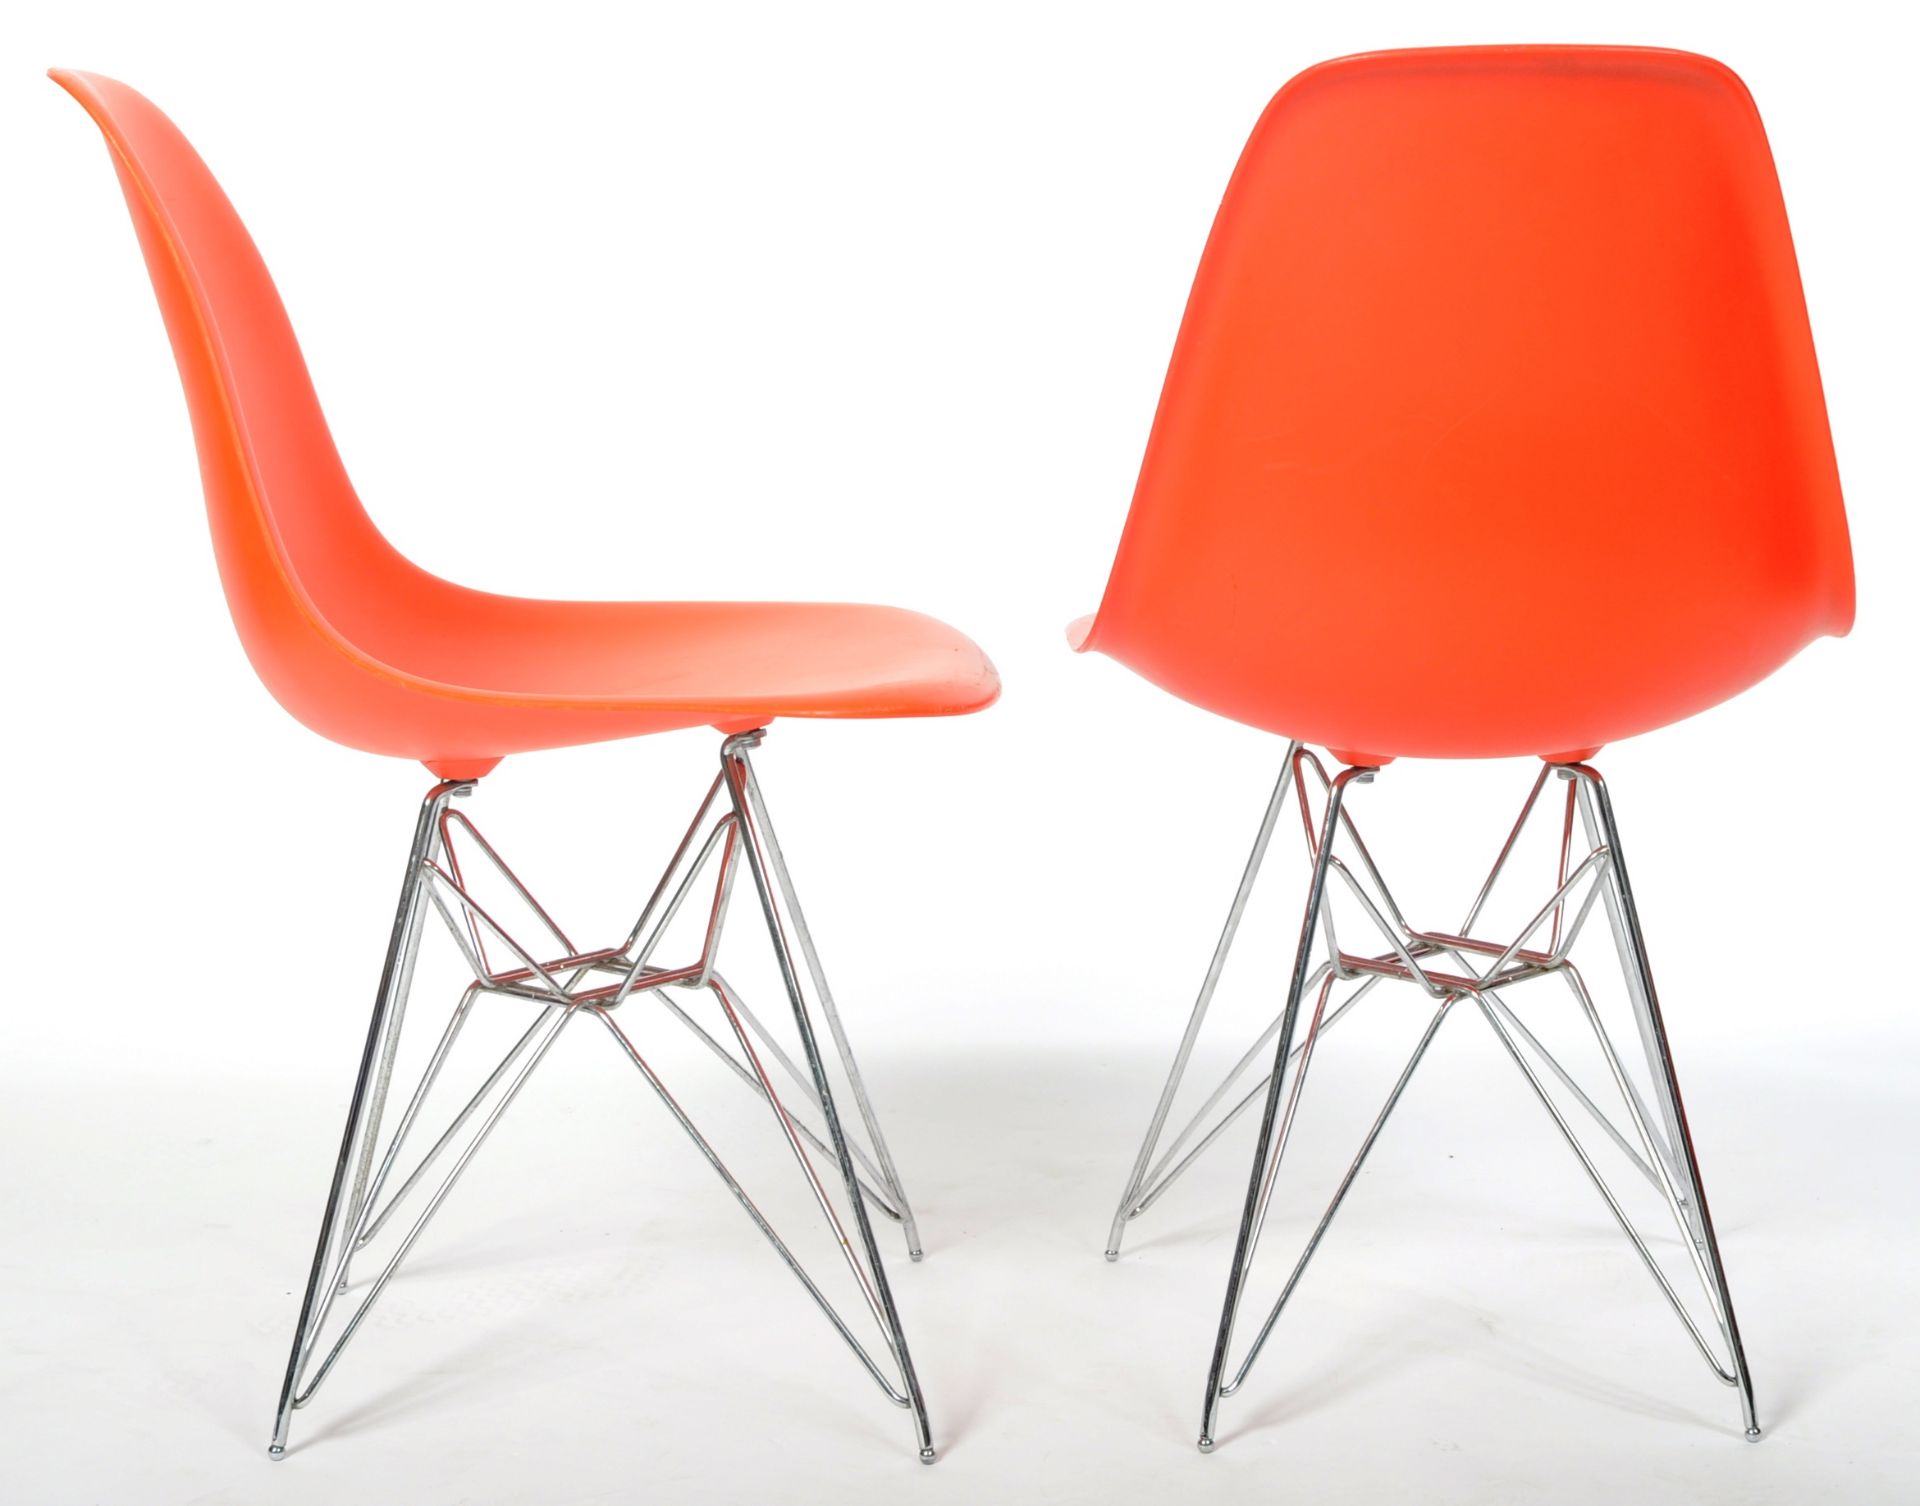 CHARLES & RAY EAMES FOR VITRA - SET OF SIX DSR EAMES PLASTIC CHAIRS - Image 8 of 10